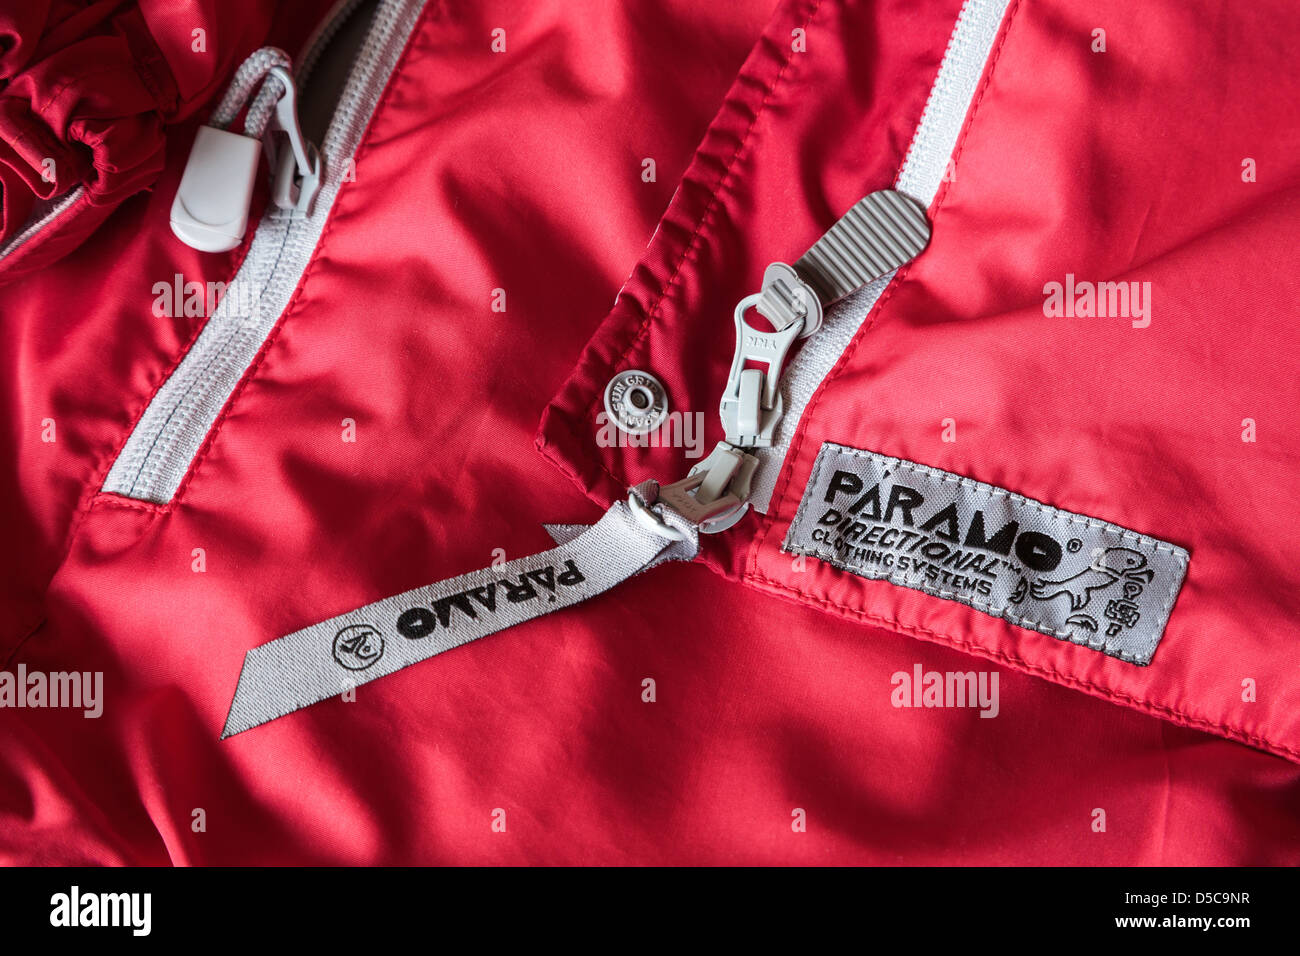 Close-up of a Nikwax Analogy Paramo directional clothing label on a red Alta II waterproof jacket. UK Stock Photo